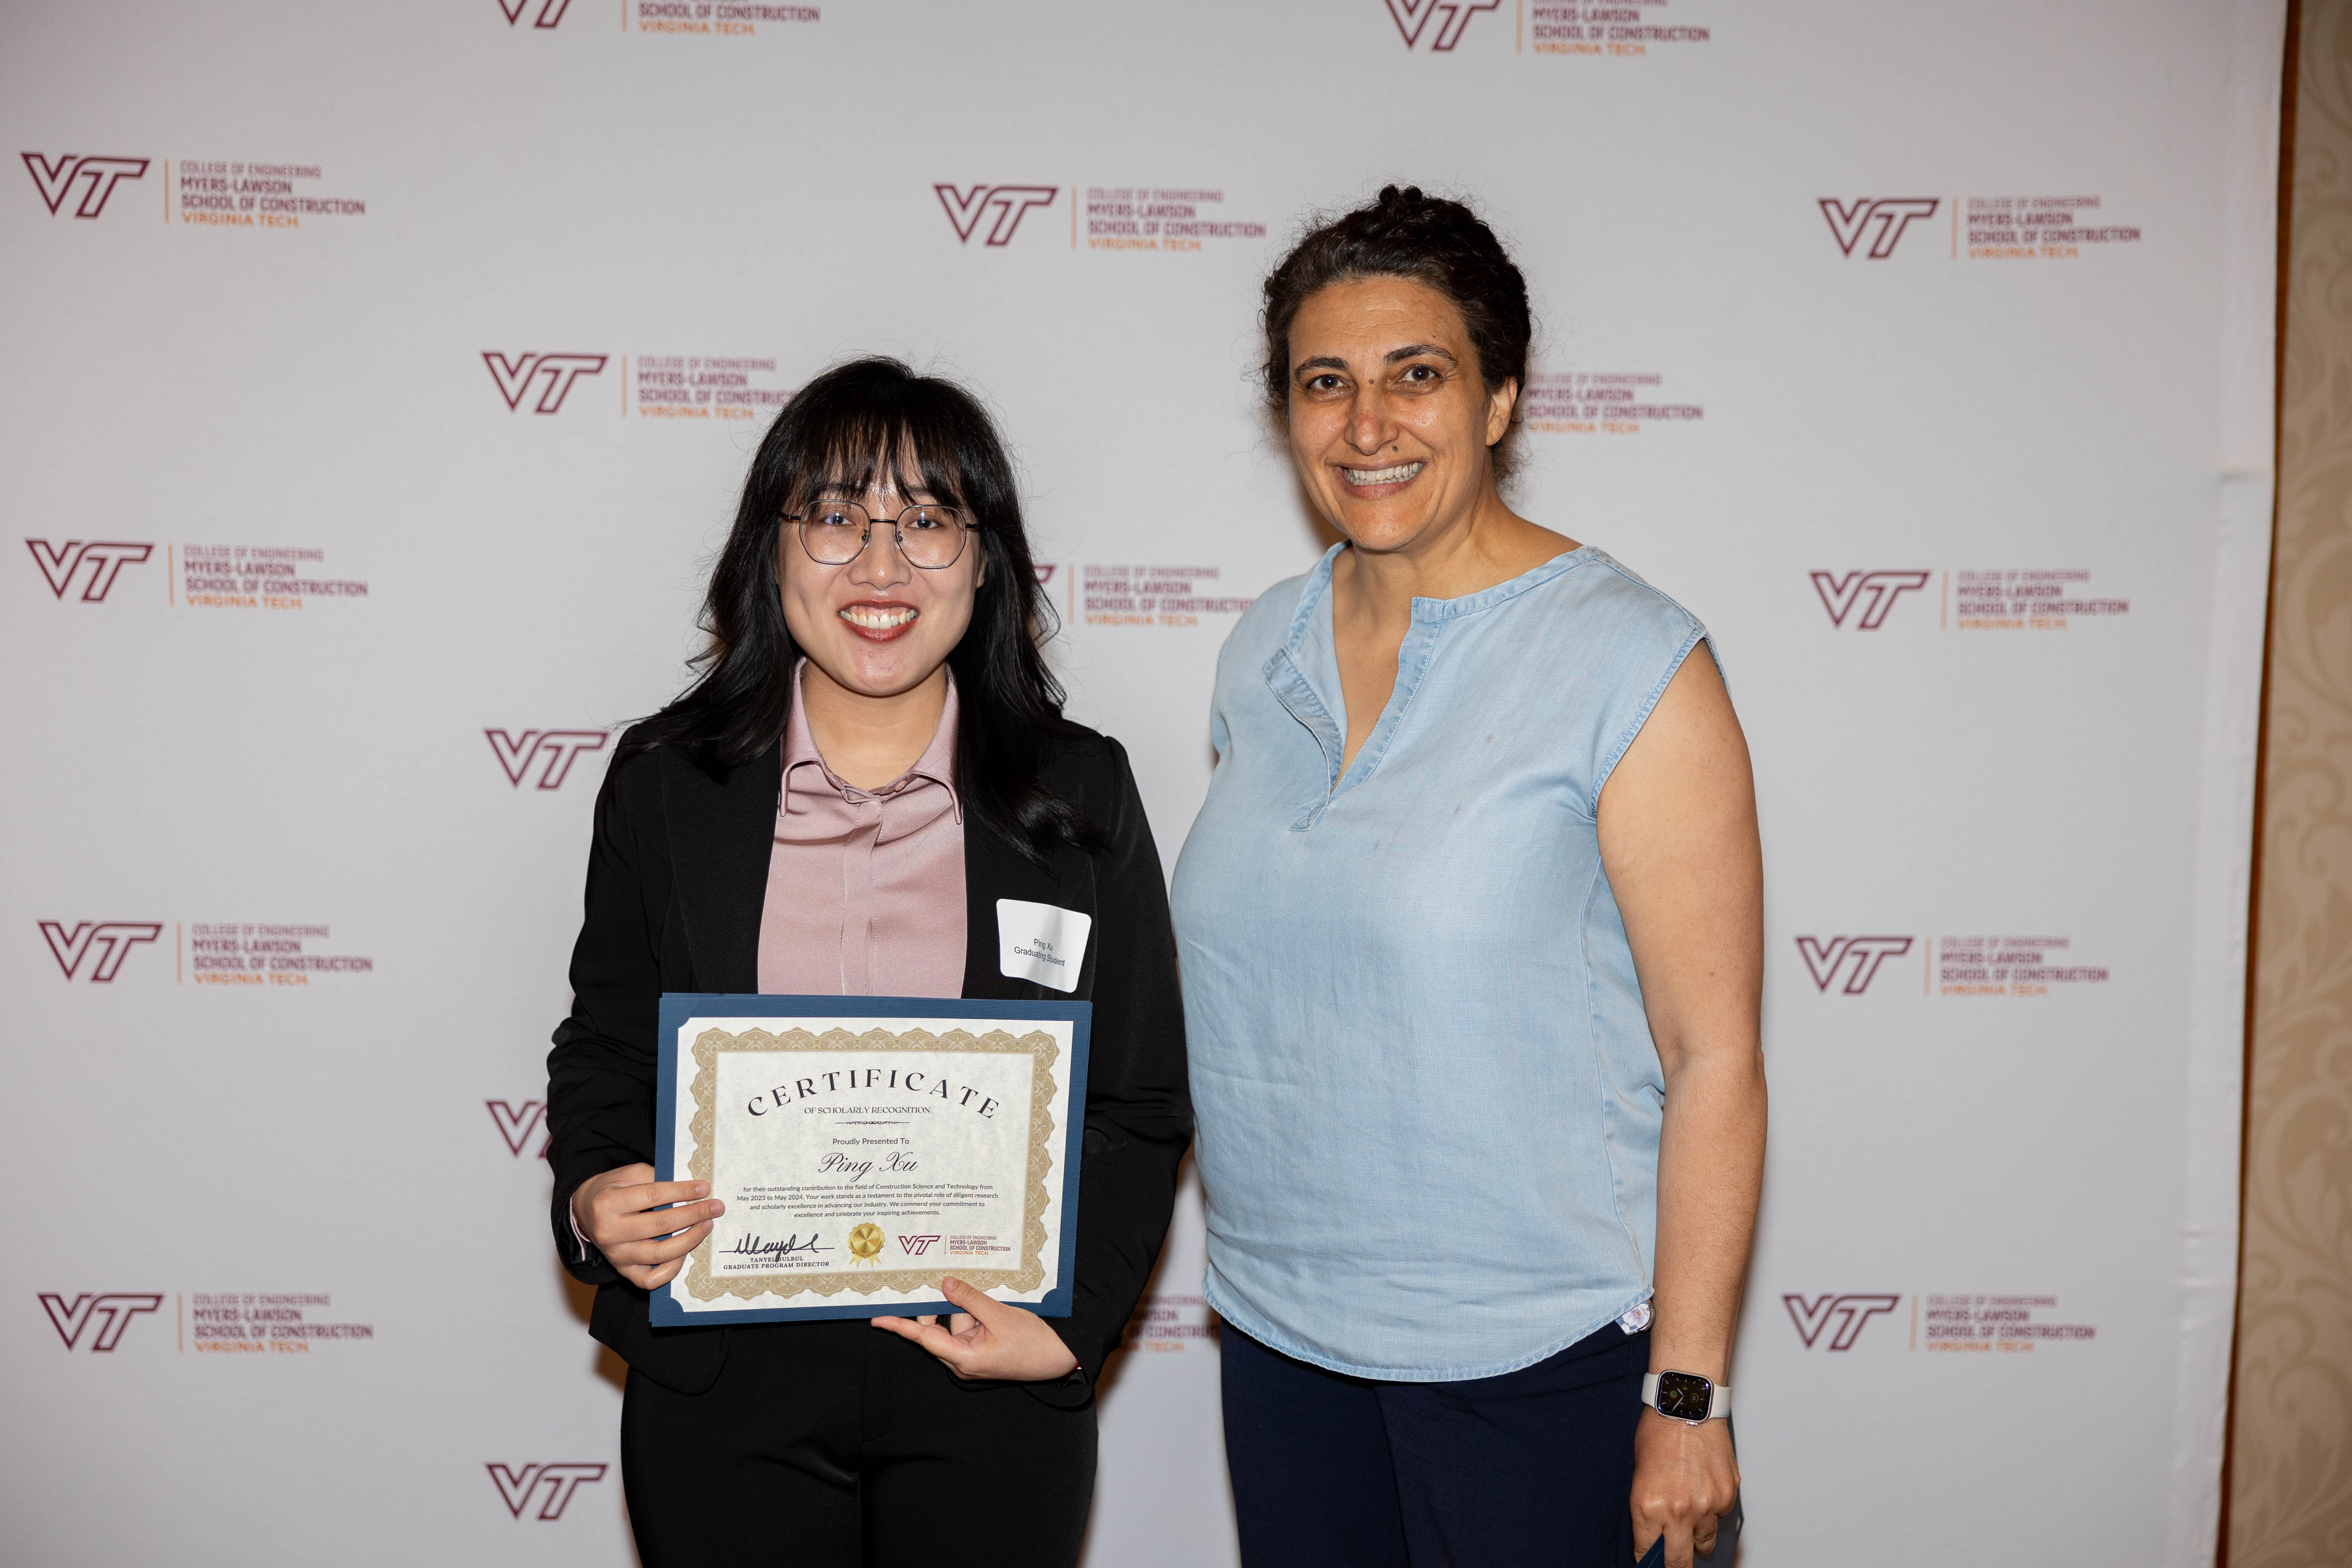 Ping Xu (at left) and Tanyel Bulbul. Photo by Will Drew for Virginia Tech.